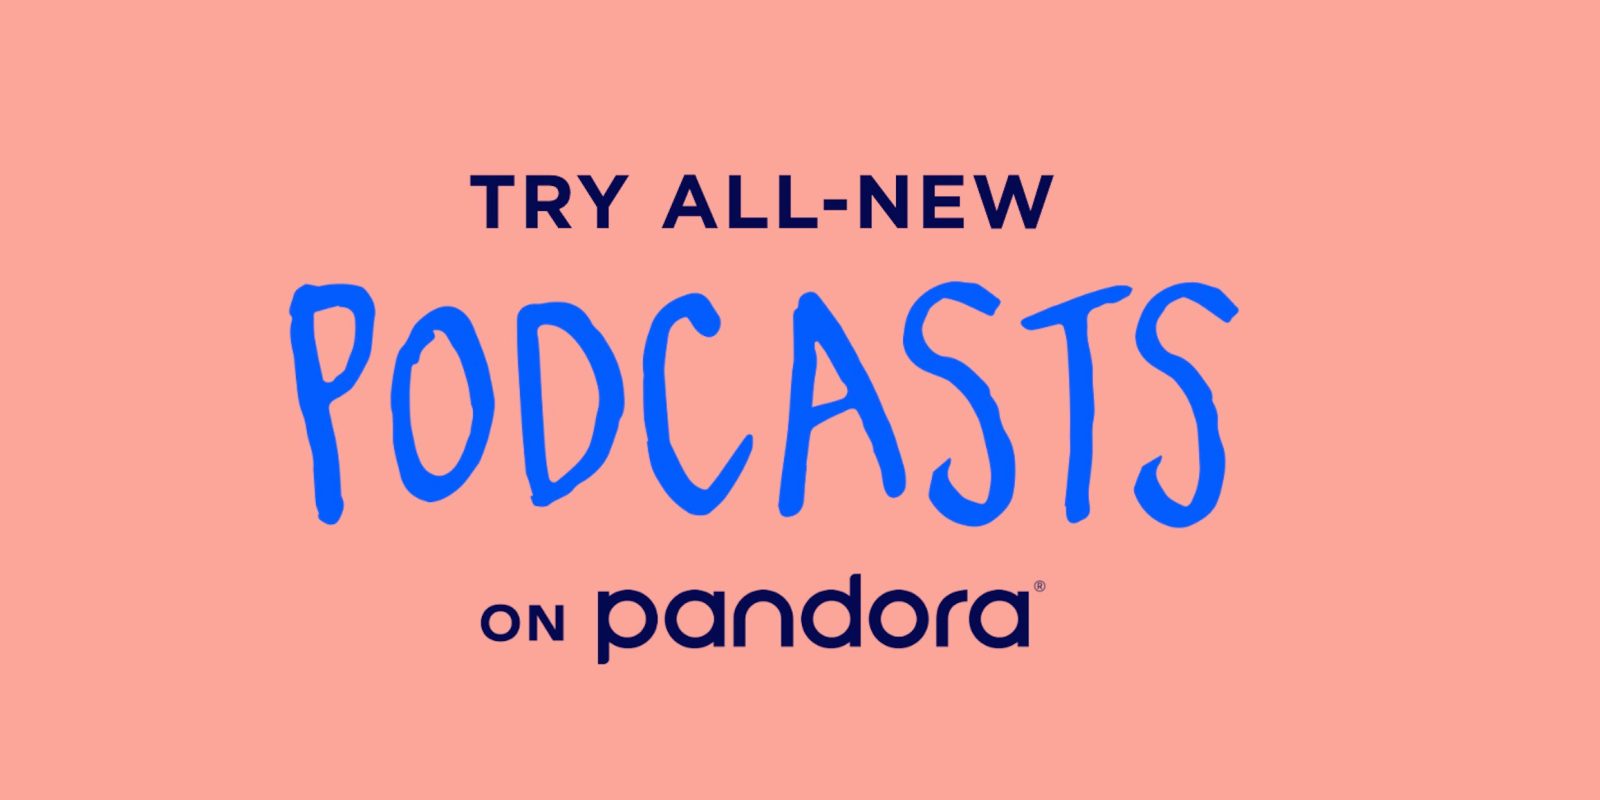 Pandora’s amazing genome project is making podcasts personal